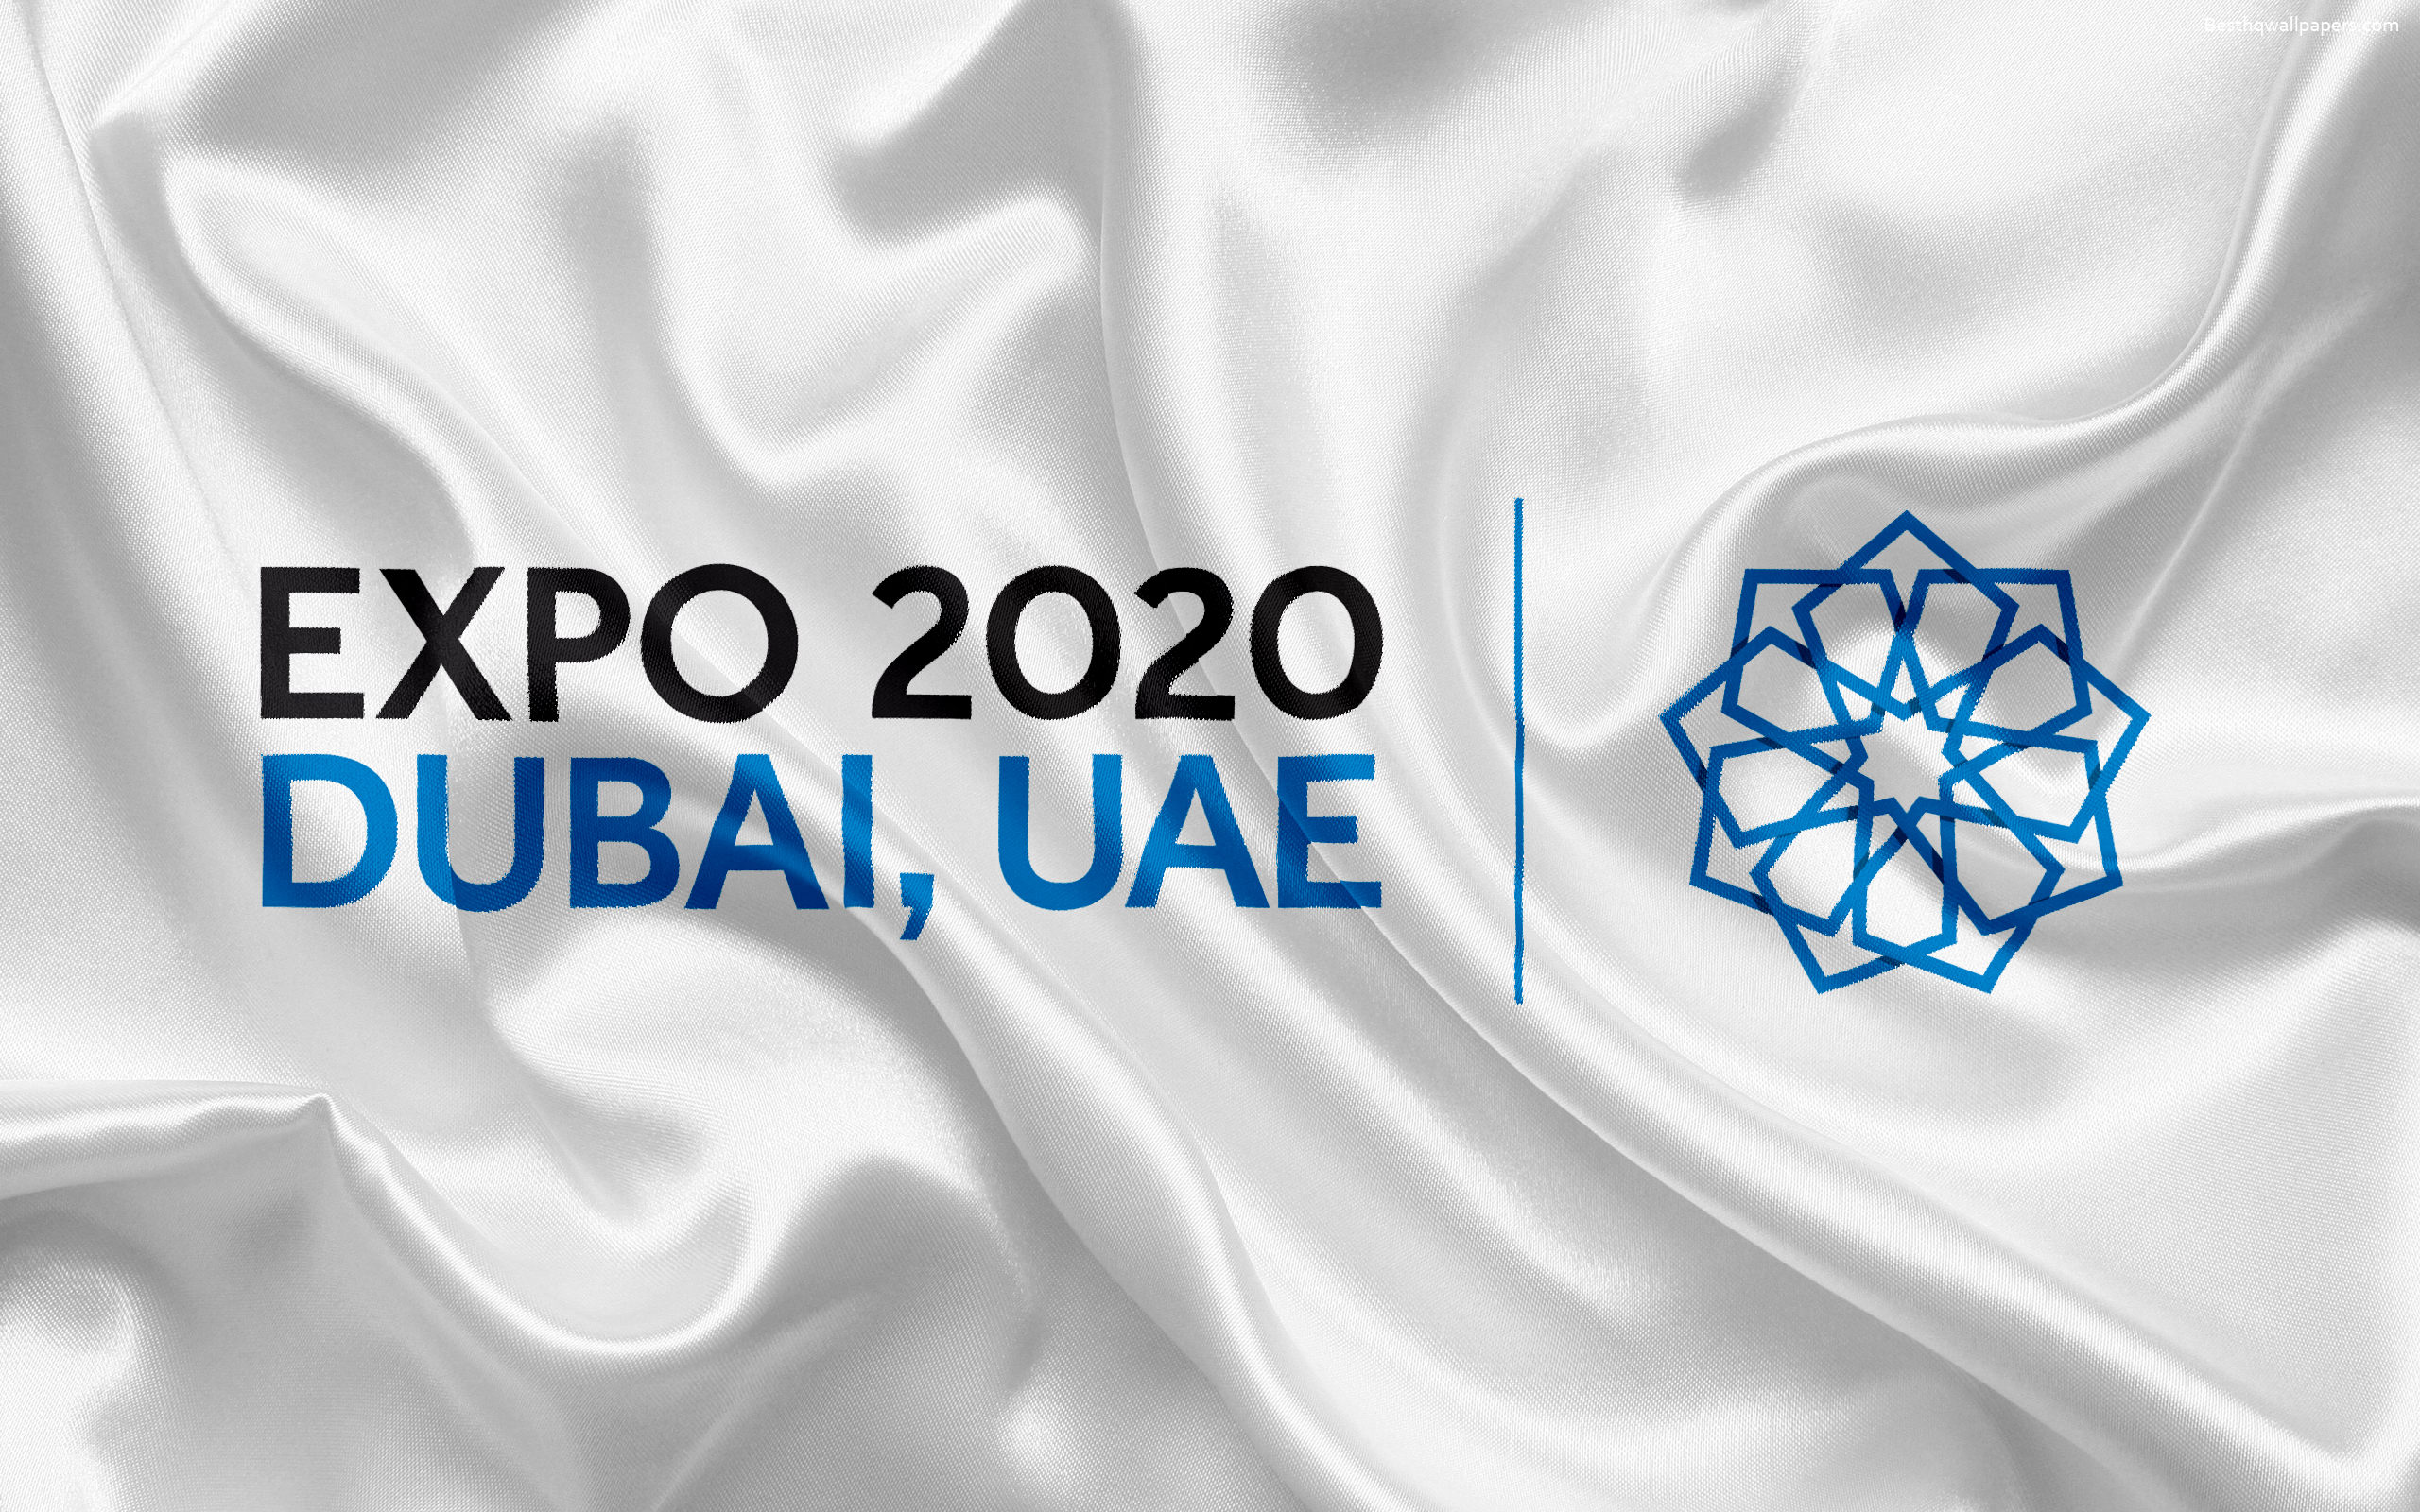 Download wallpaper Expo 2020 Dubai, UAE, emblem, Expo 2020 logo, United Arab Emirates, World Exhibition for desktop with resolution 2560x1600. High Quality HD picture wallpaper